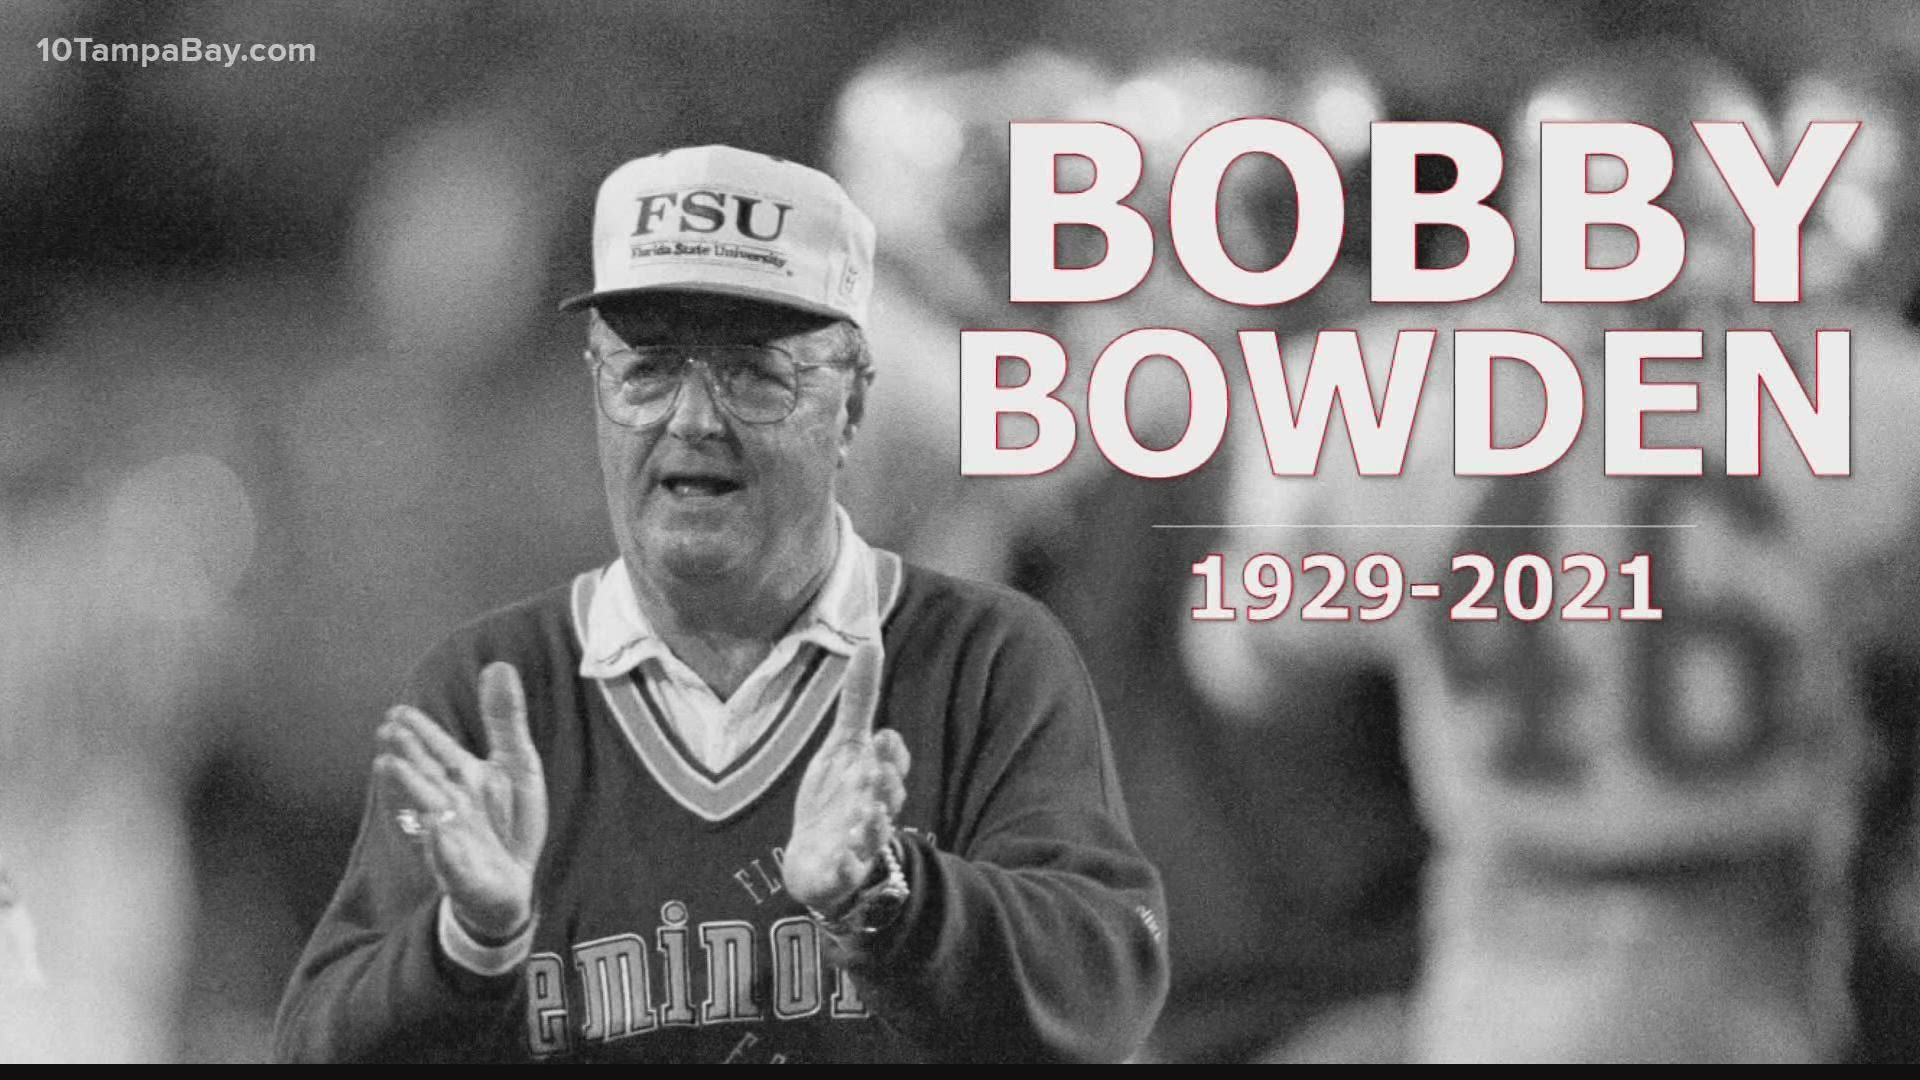 The legendary football coach led the Seminoles to two national championships during his 34 years with the team.